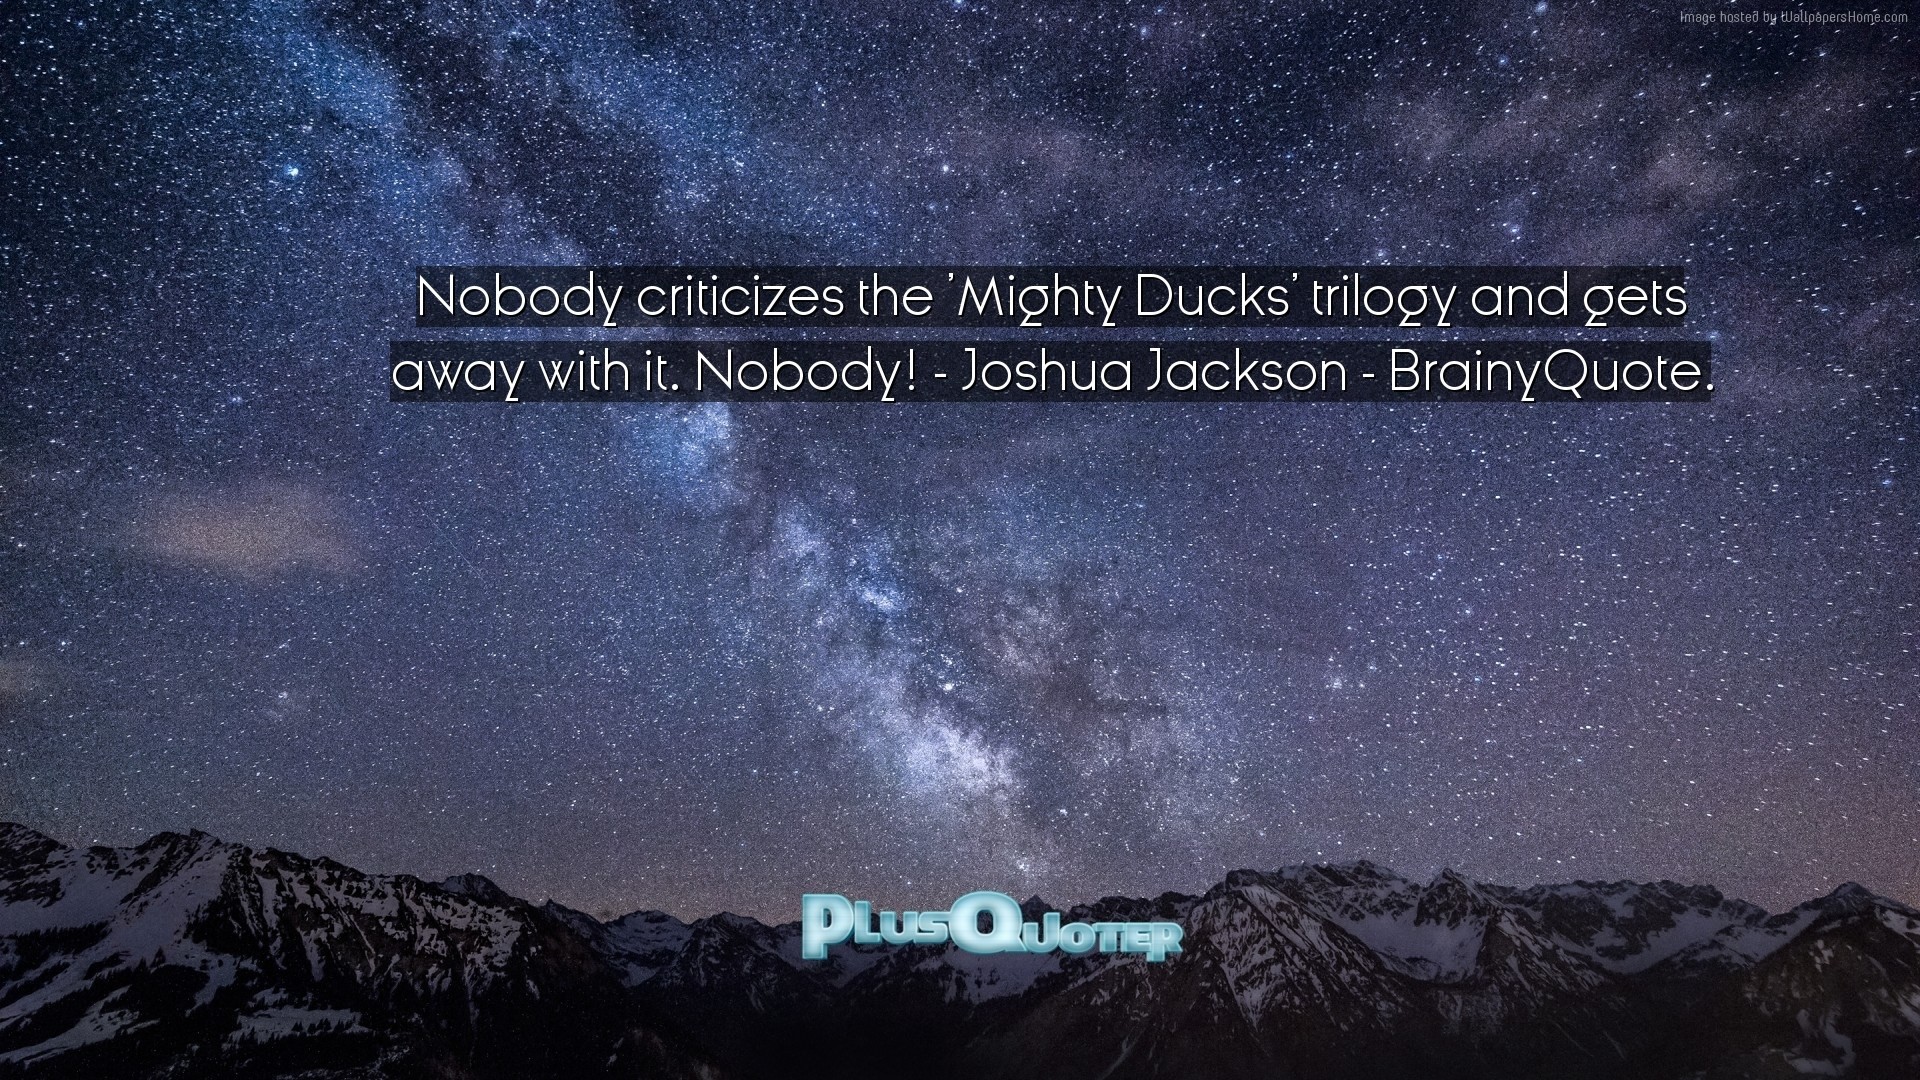 1920x1080 Download Wallpaper with inspirational Quotes- "Nobody criticizes the